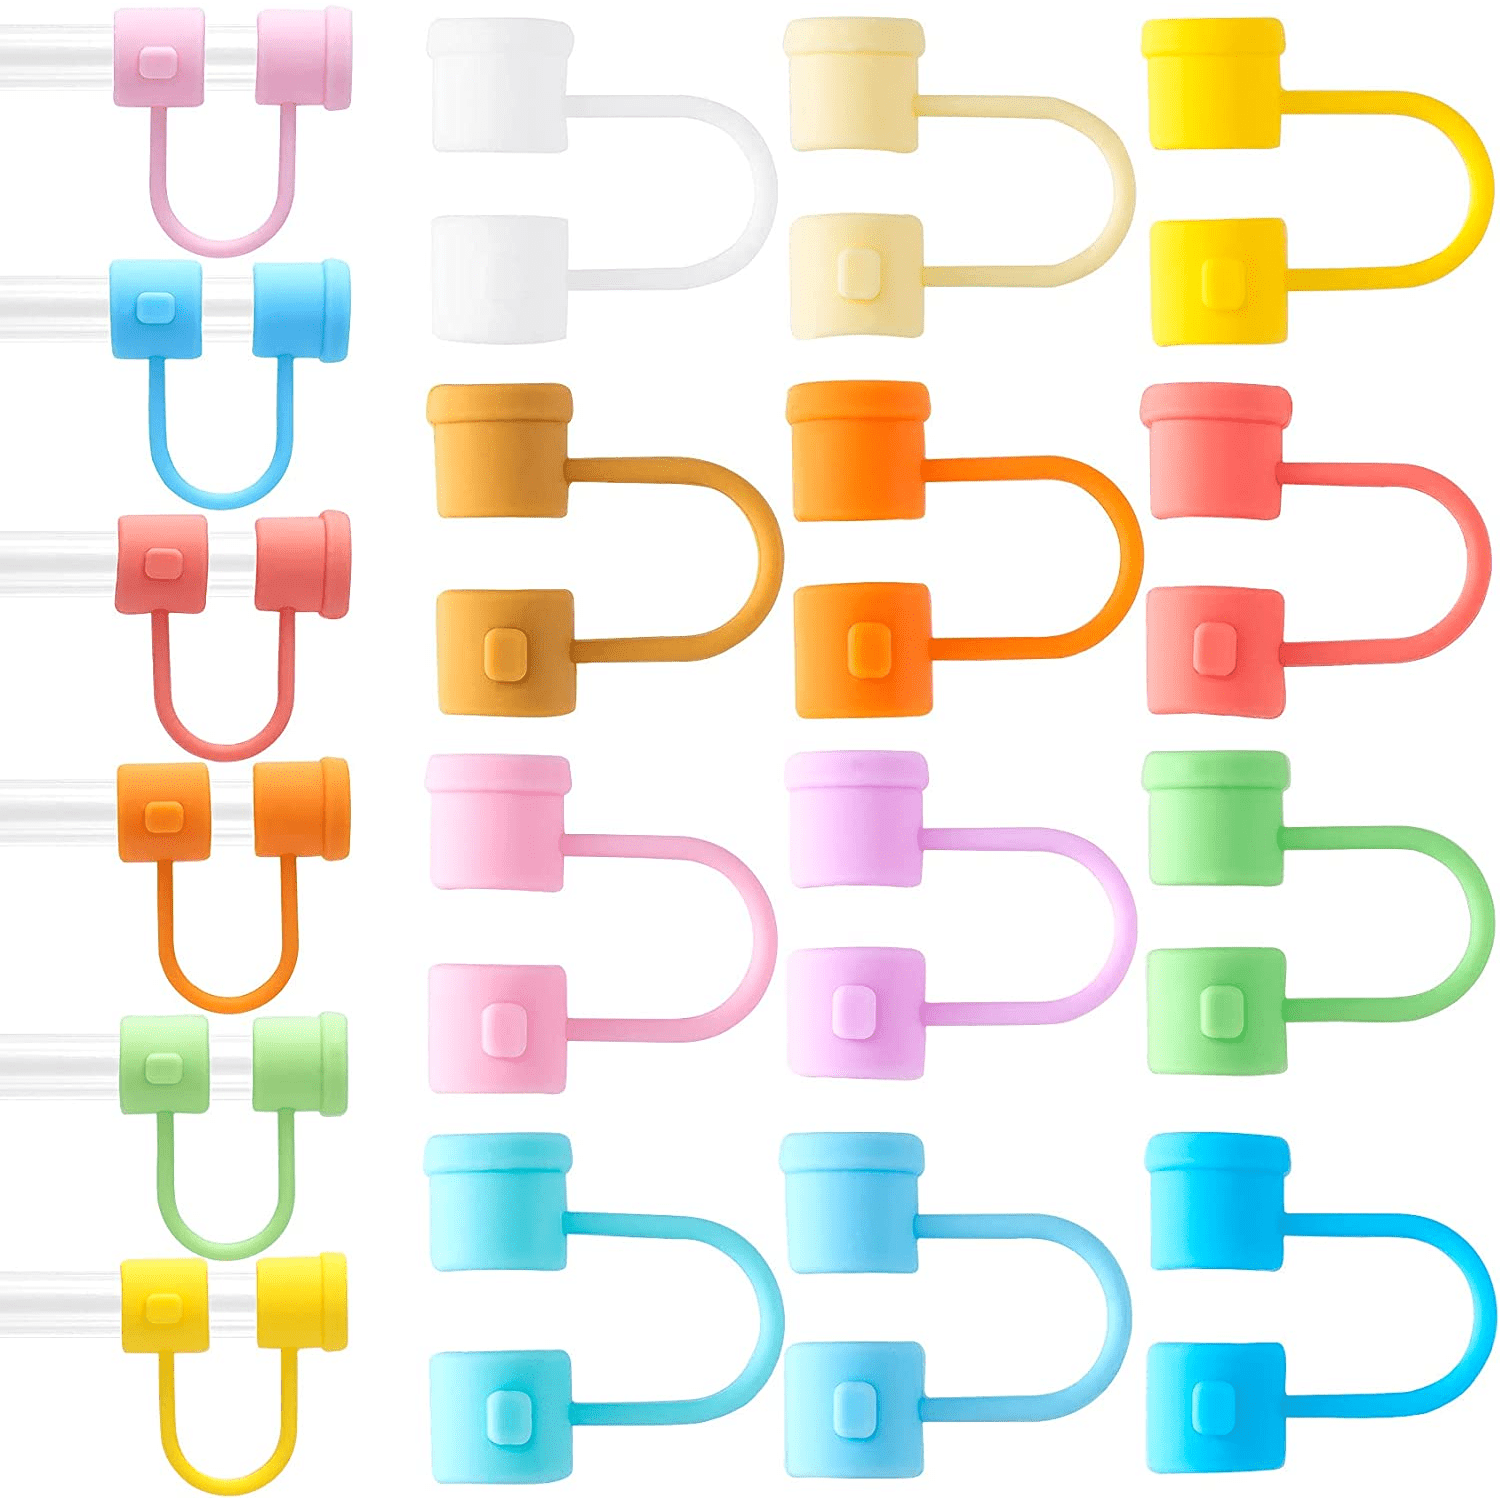 Straw Cover For Stanley, 5 PCS Suitable Silicone Stanley Cup Straw Cover -  Straw Covers for Reusable Straws - Variable Colour Stanley Straw Cover 